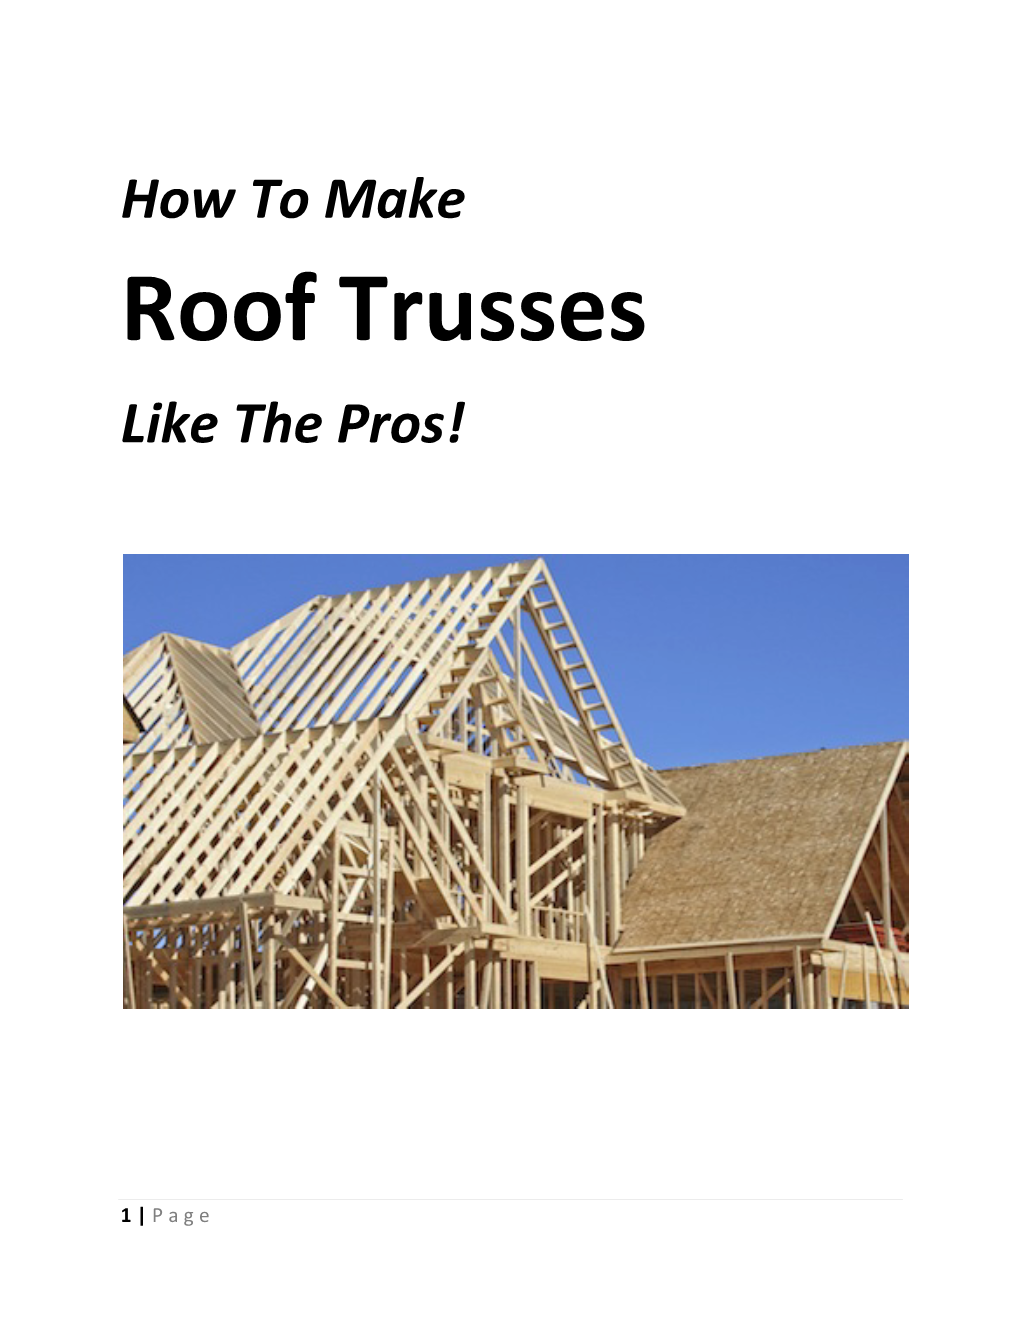 Roof Trusses Like the Pros!